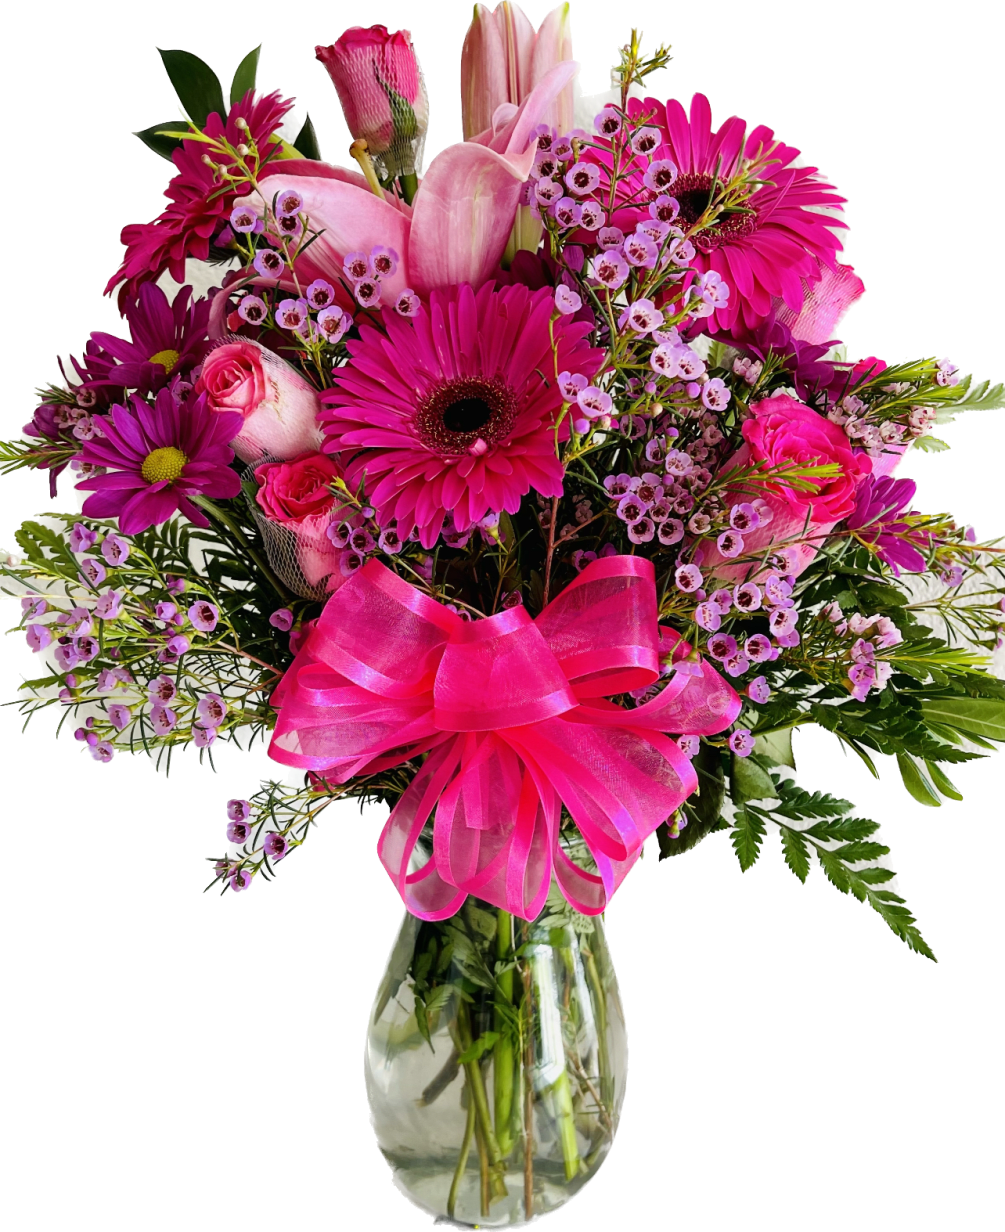 An arrangement with pink an lavender mixed flowers that will definitely tell